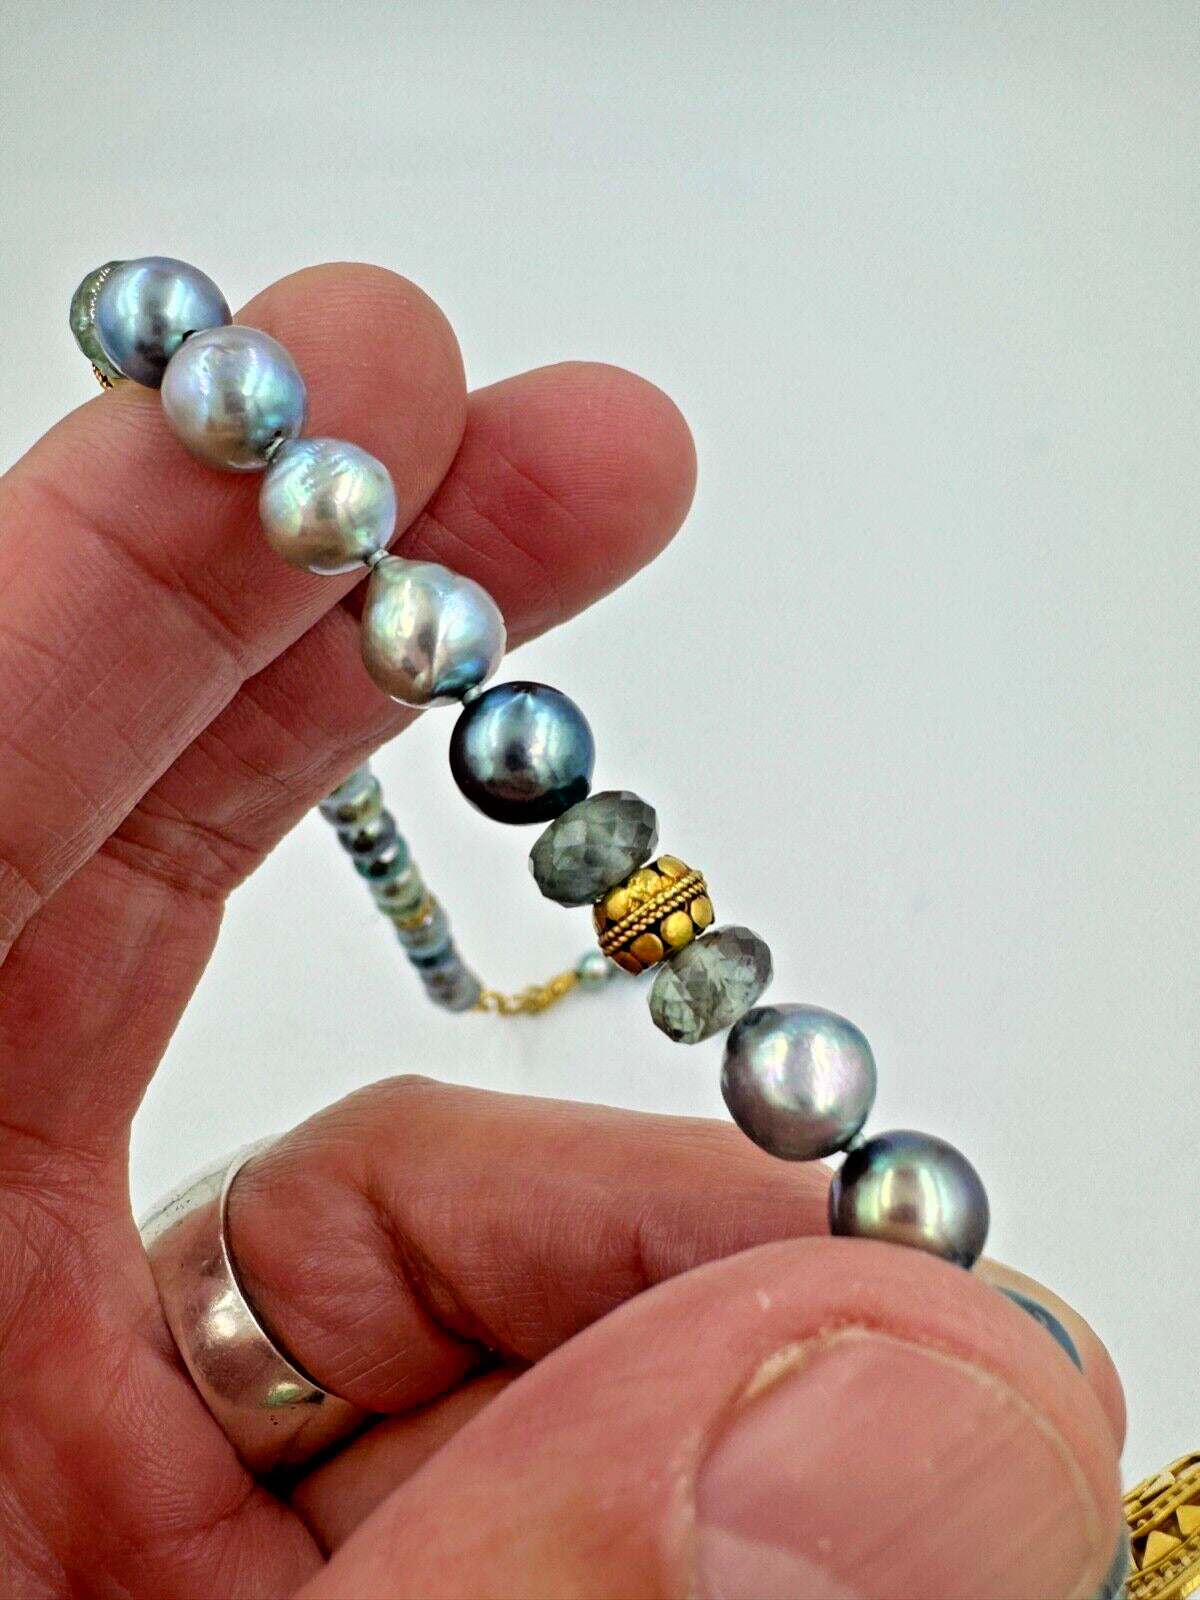 21k gold blue Pearl Strand Necklace with Gold Quartz Spacers